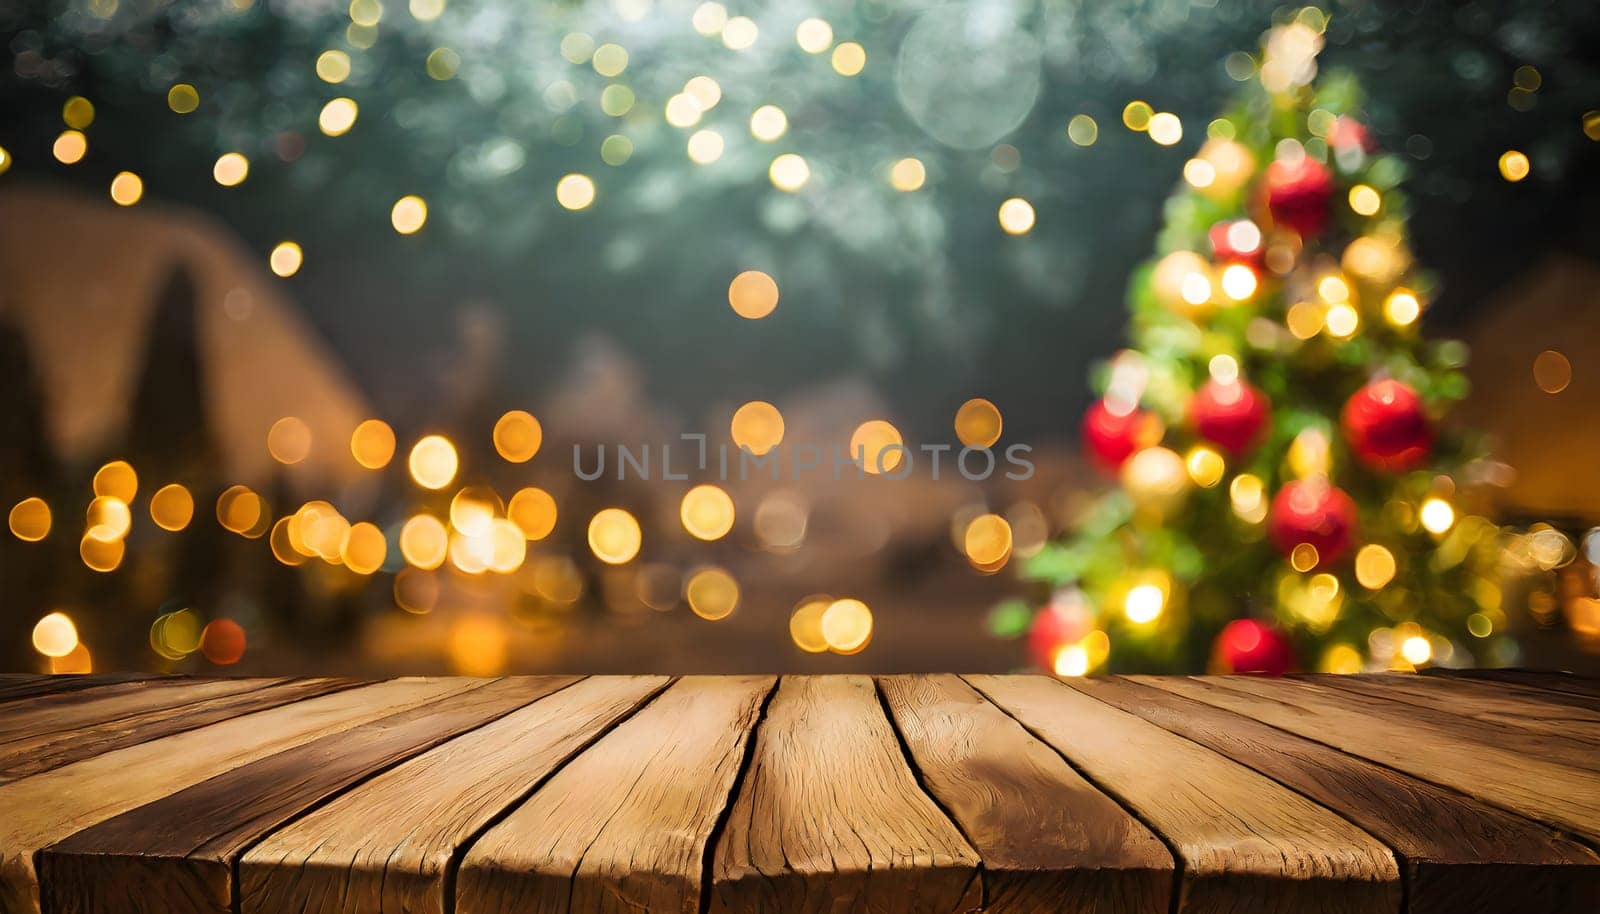 Christmas decoration in background with a empty wooden background. c